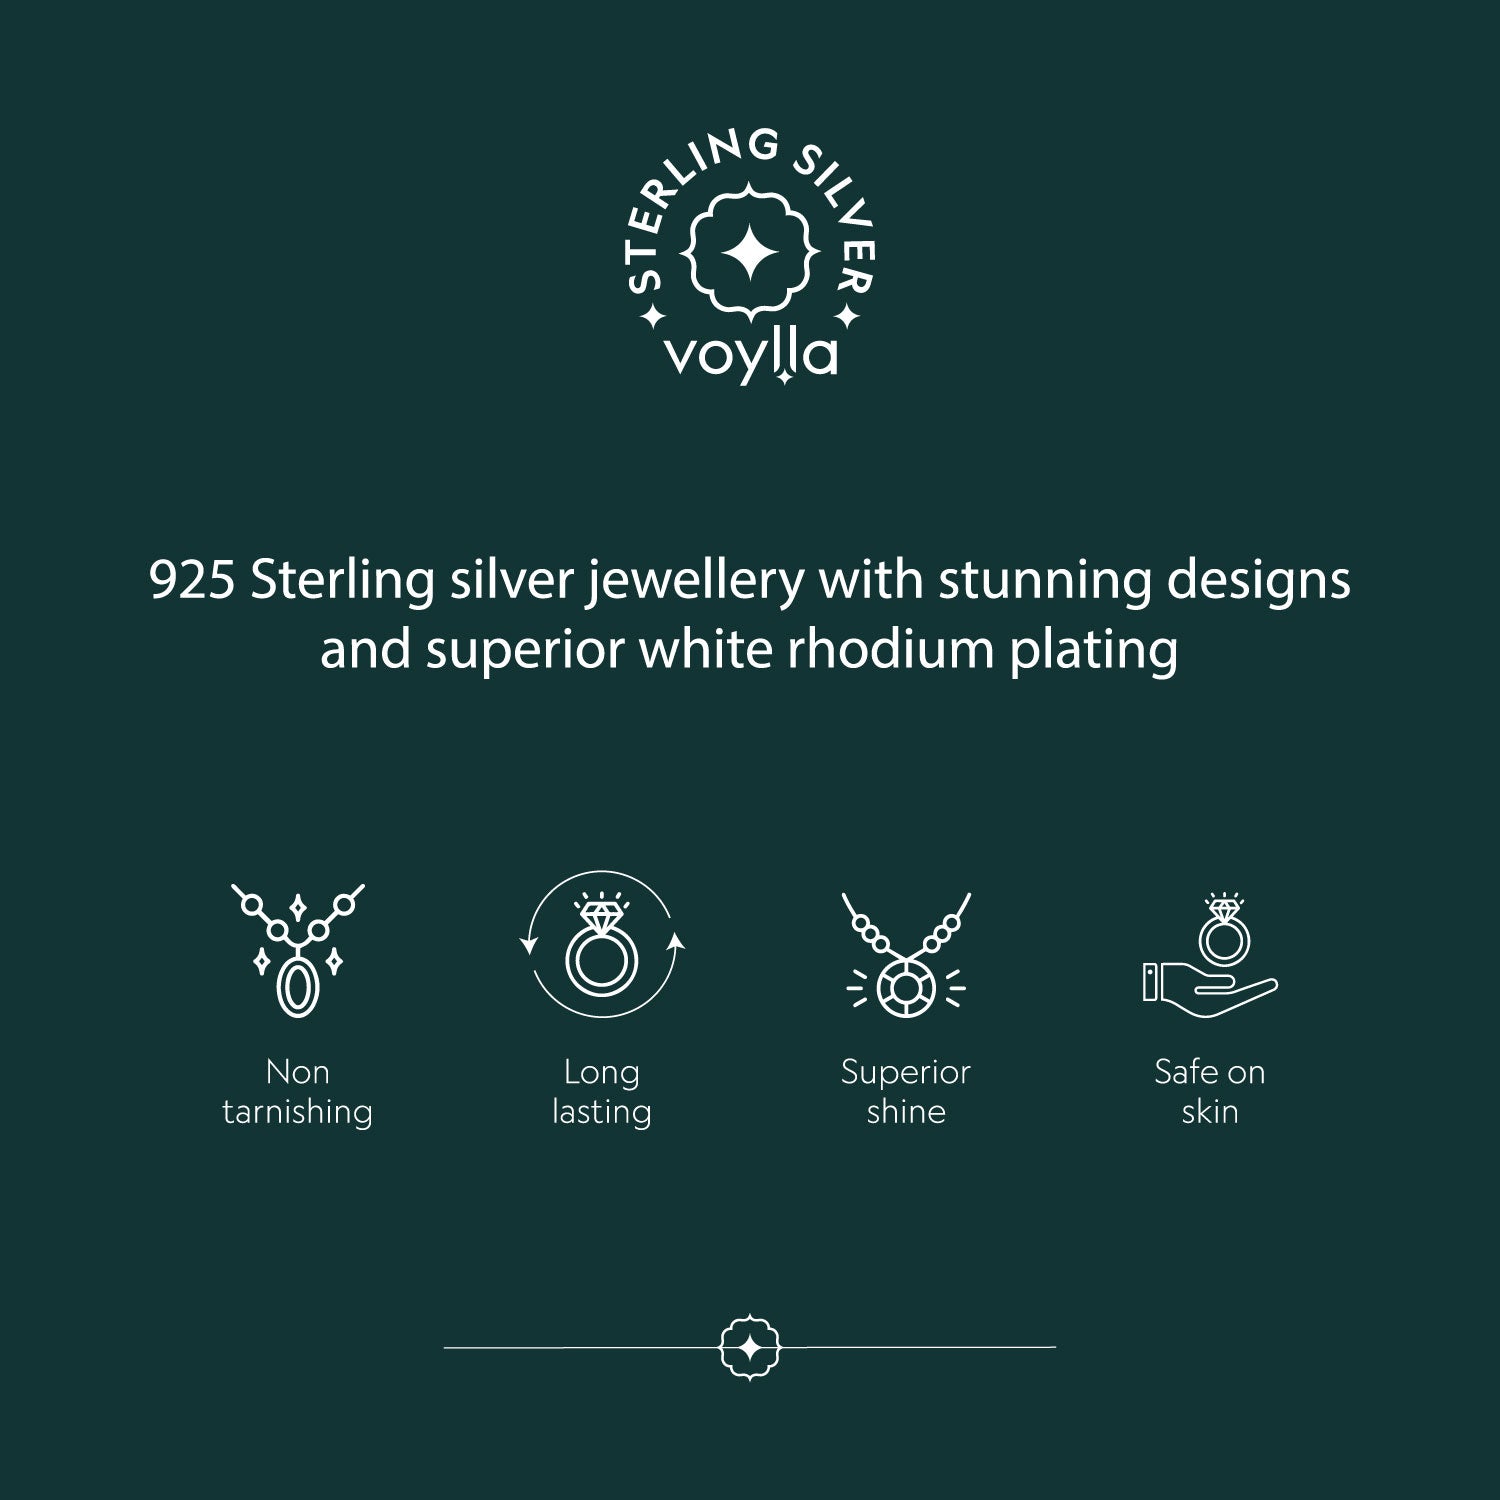 925 Sterling Silver Round Cut White CZ Ring